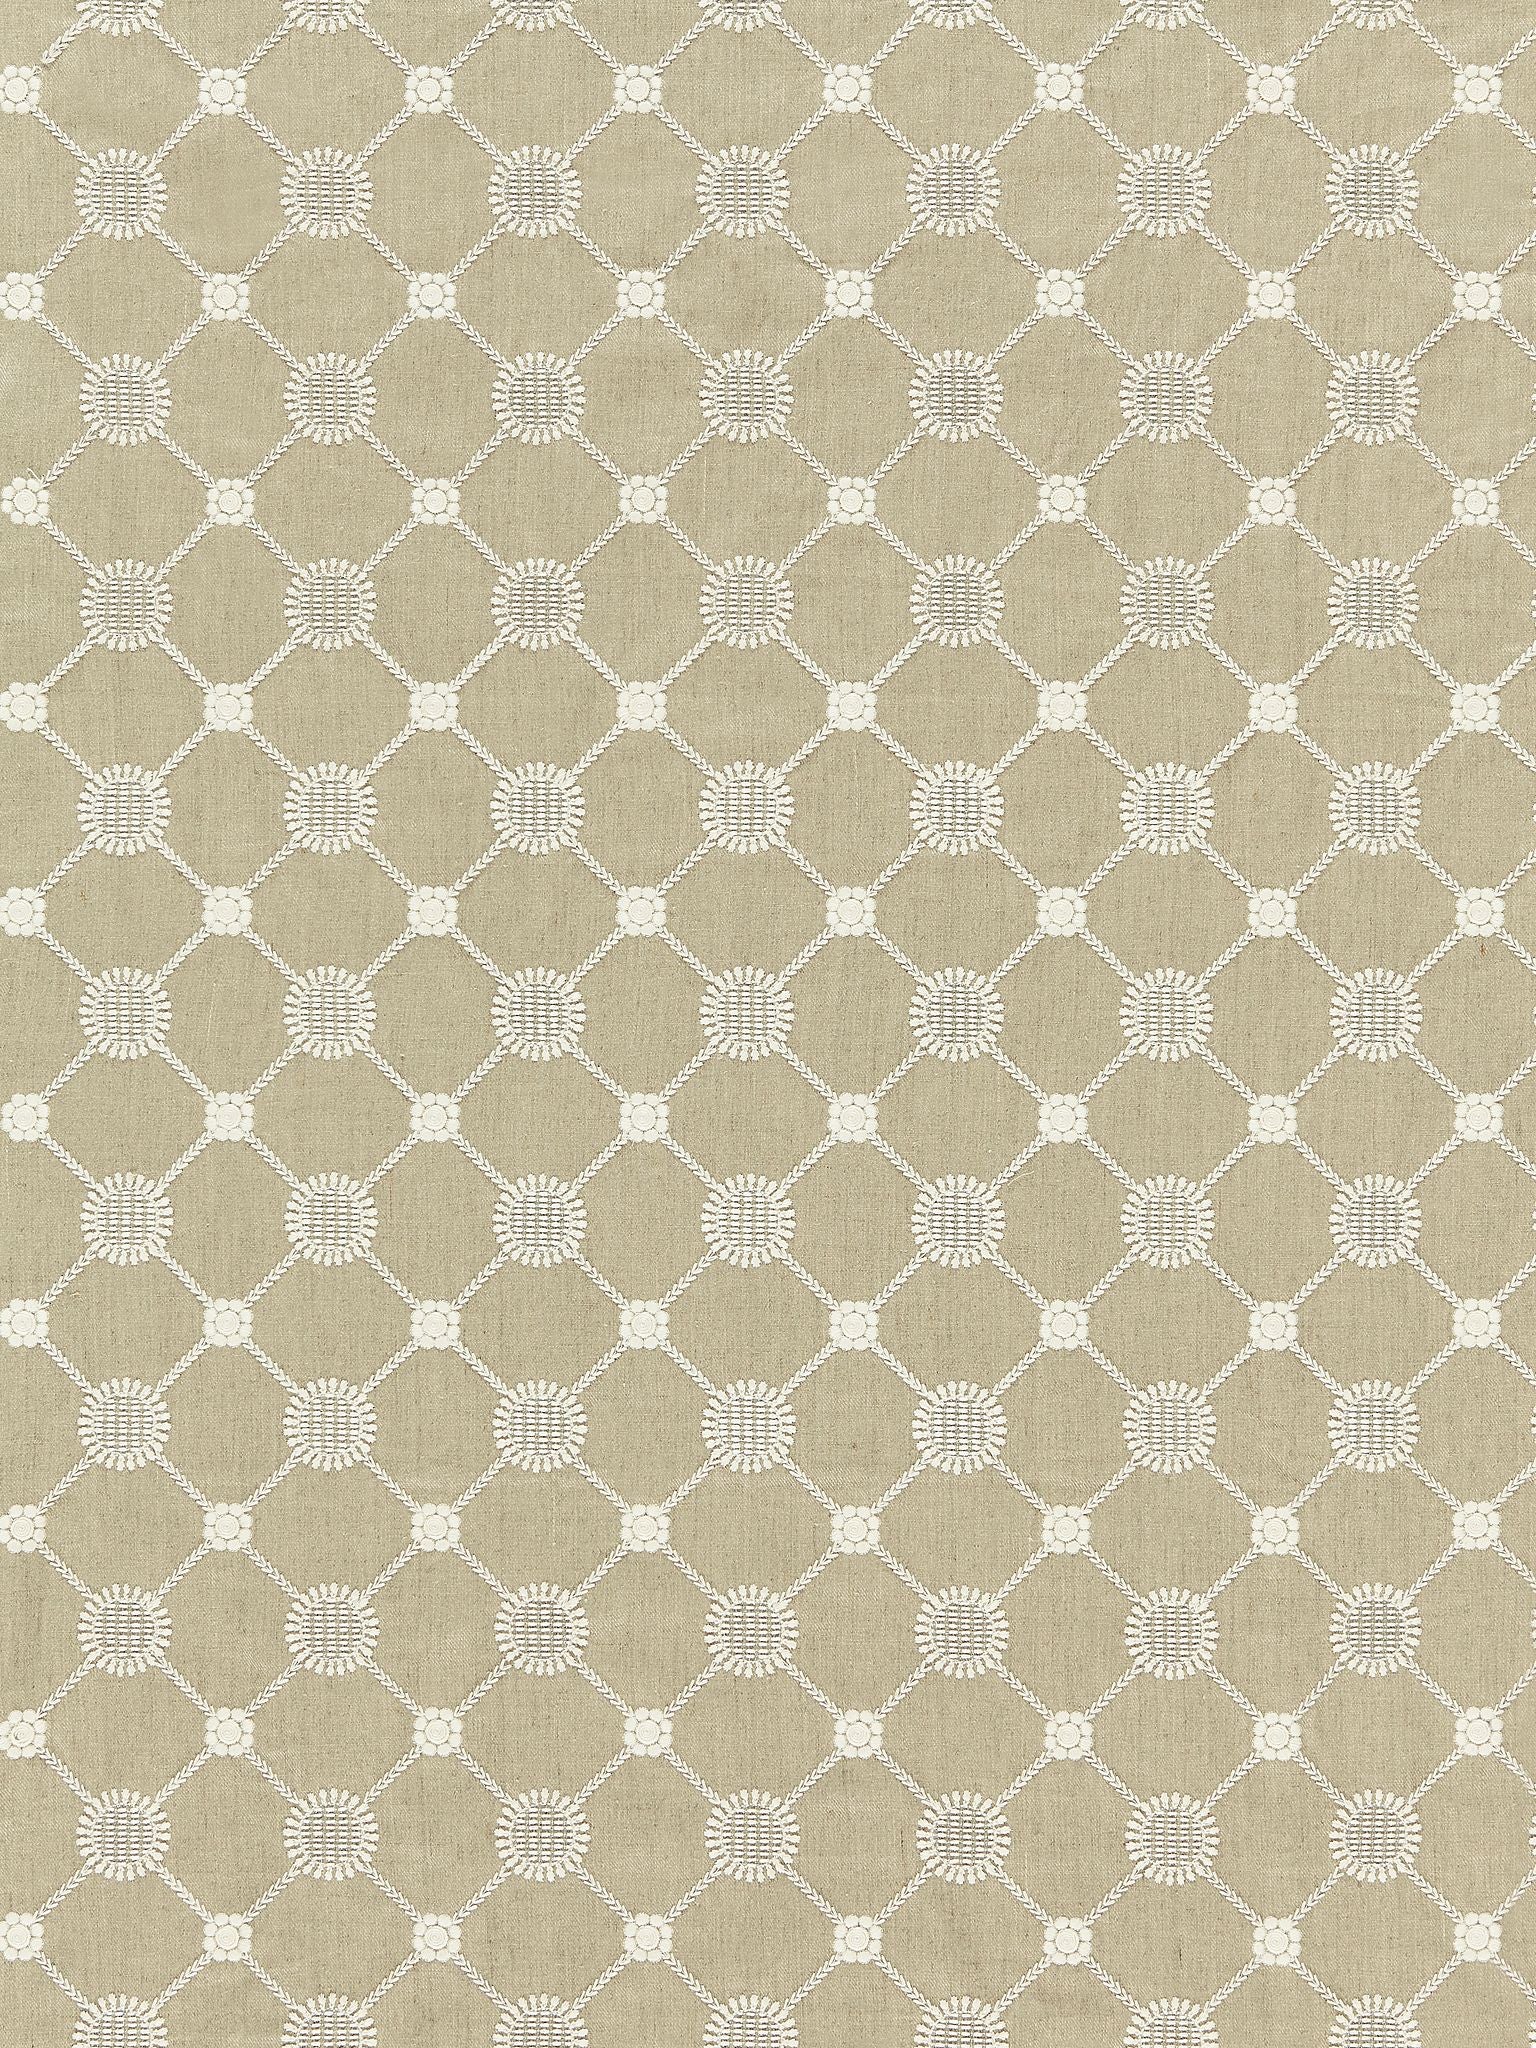 Gustavian Diamond fabric in flax color - pattern number SC 000127161 - by Scalamandre in the Scalamandre Fabrics Book 1 collection